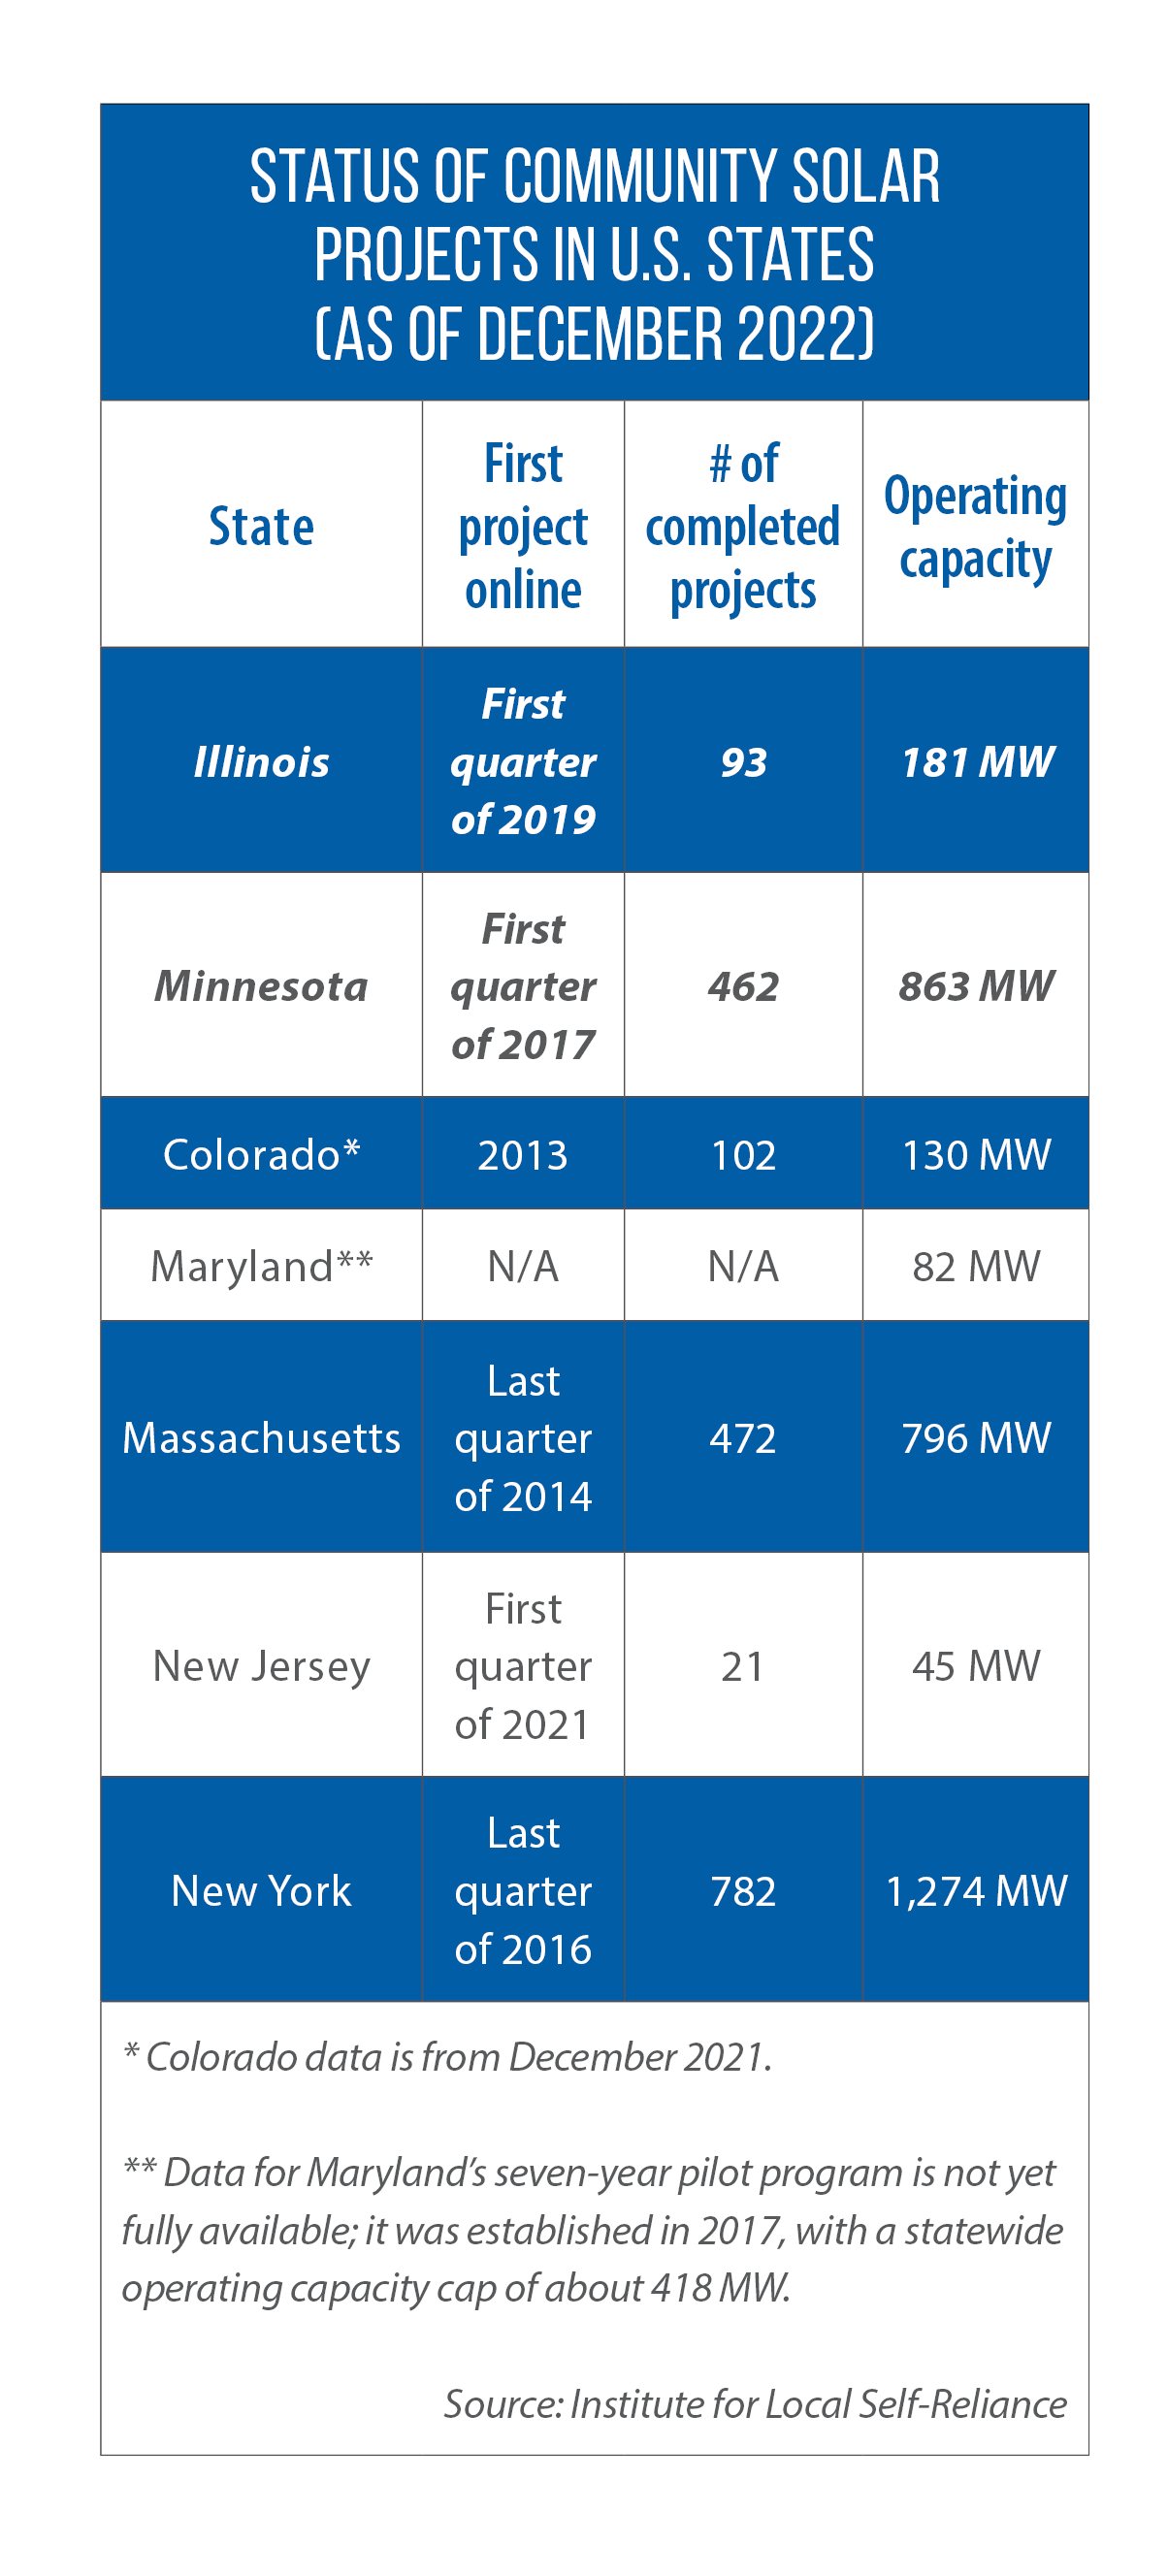 Table of community solar projects in U.S. states as of December 2022